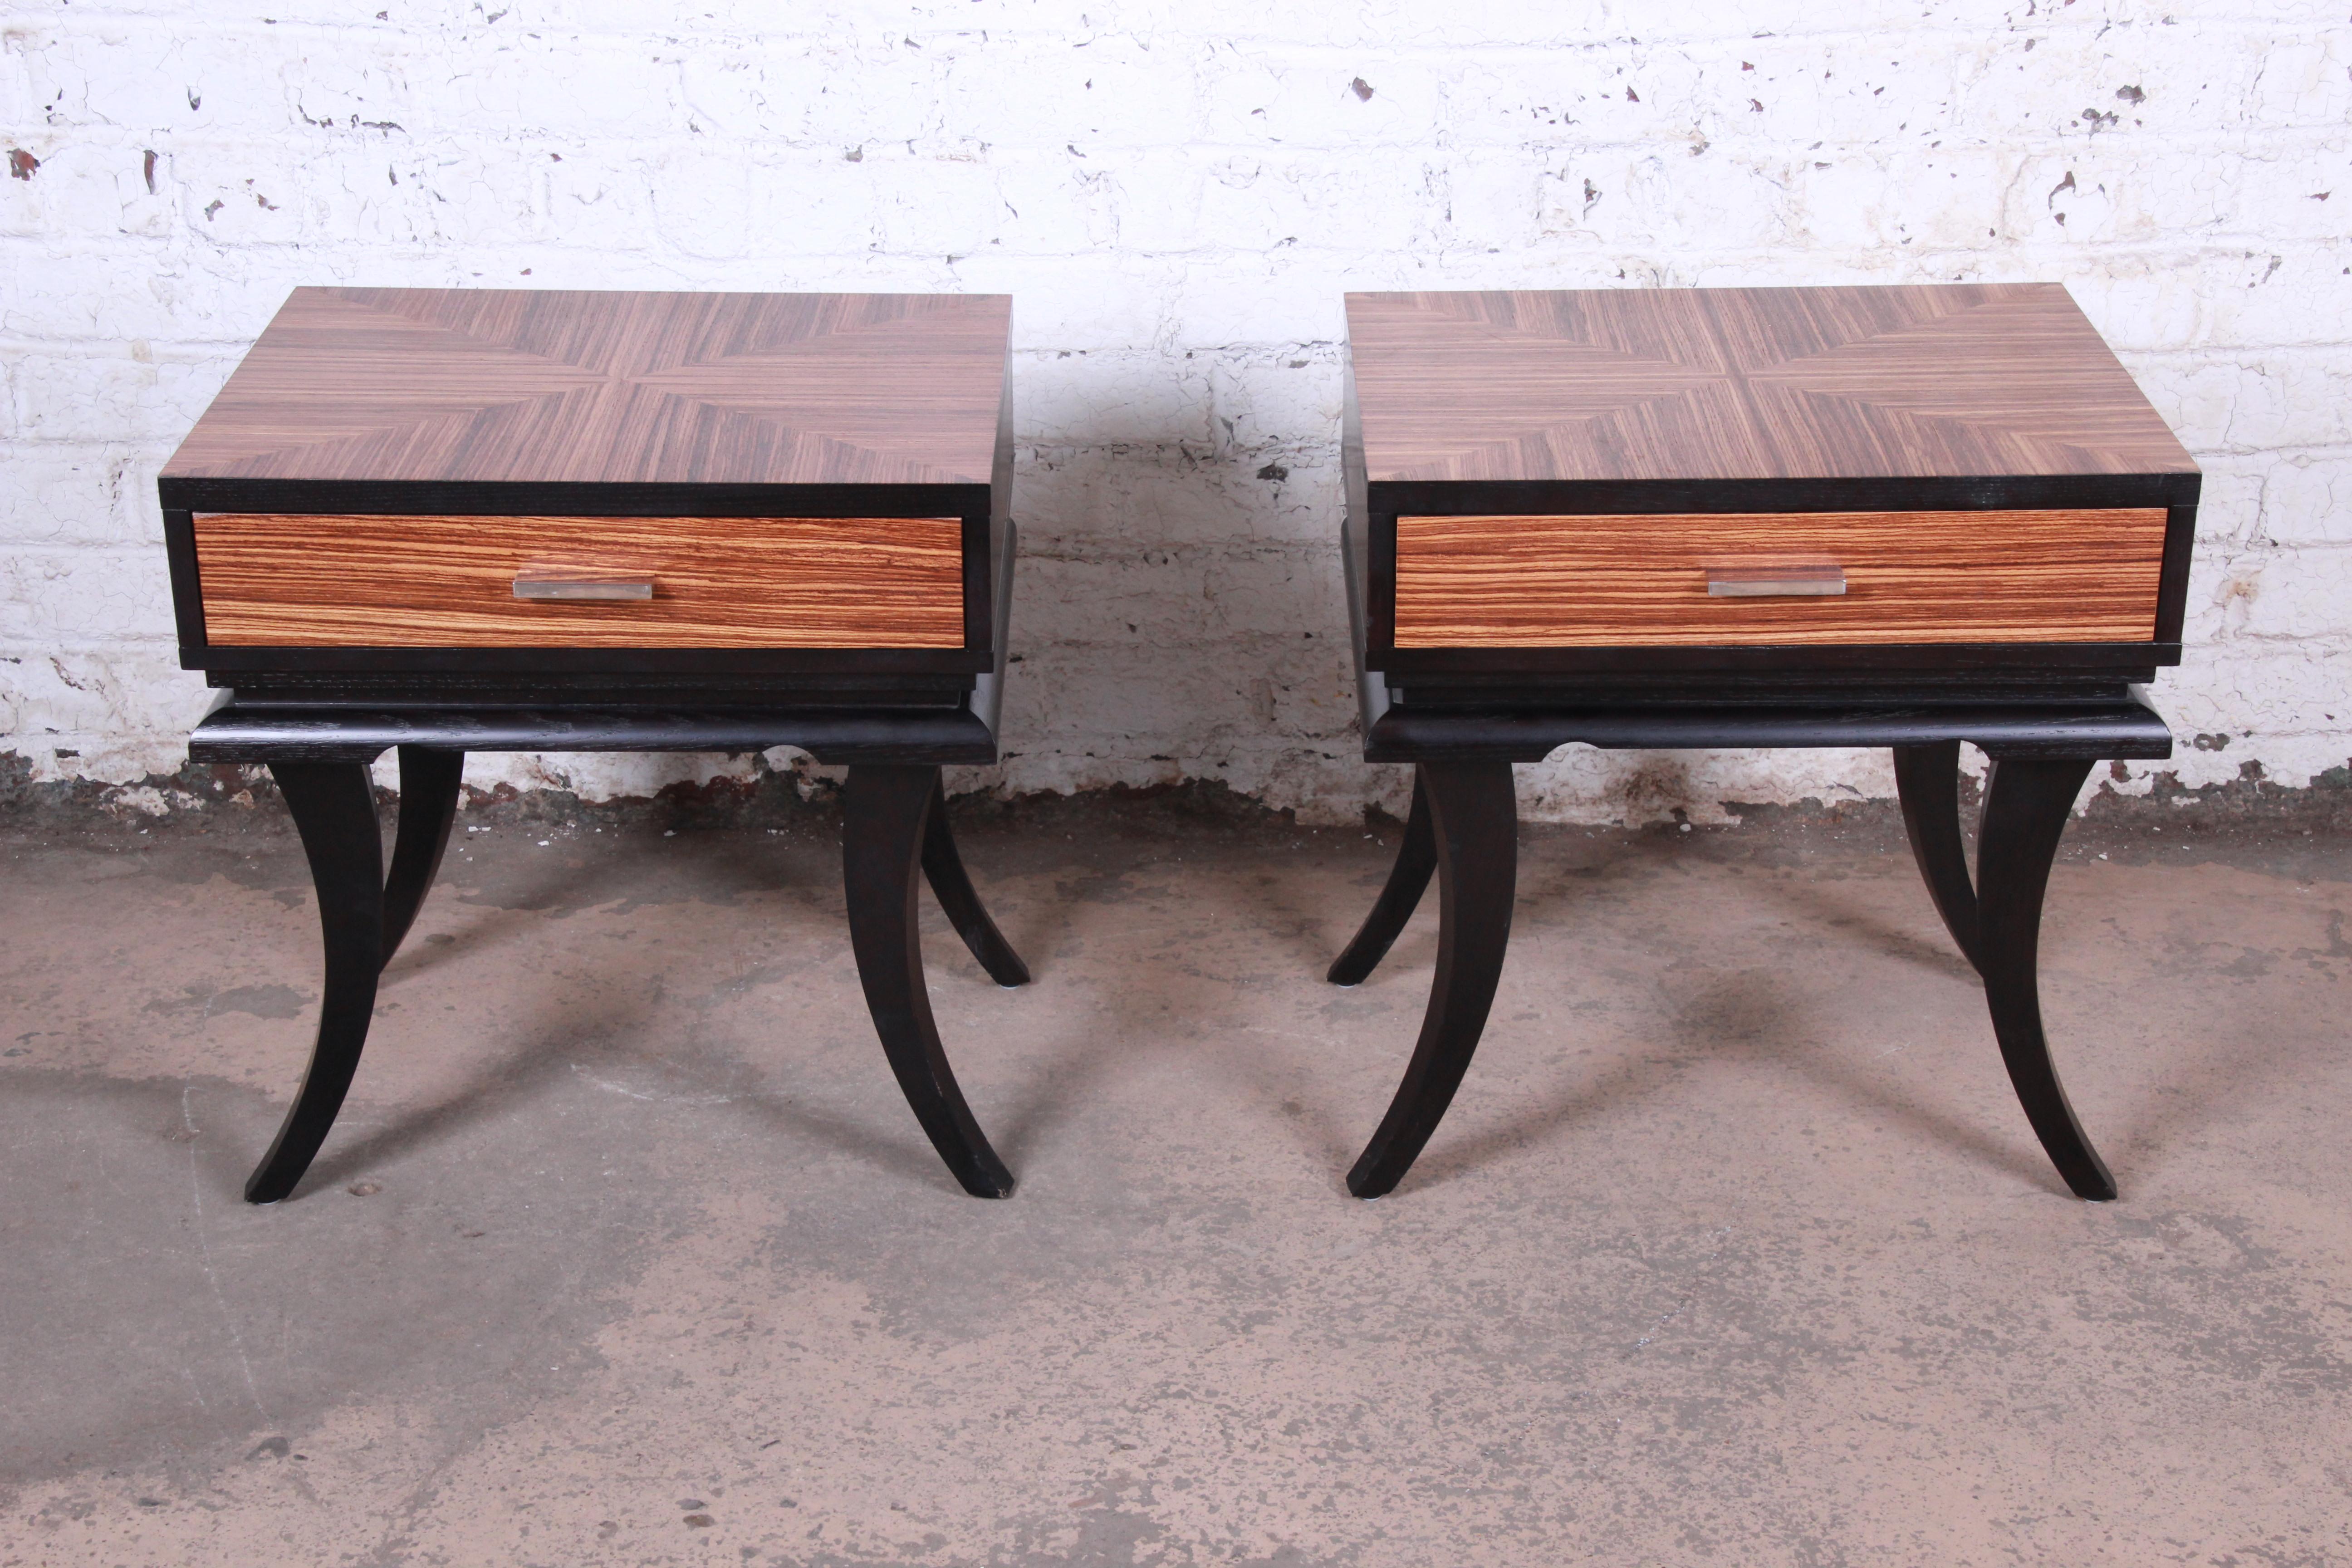 A gorgeous pair of James Mont style saber leg nightstands

USA, late 20th century

Inlaid zebrawood tops and drawer fronts + ebonized wood + chrome hardware + leather drawer inserts

Measures: 24